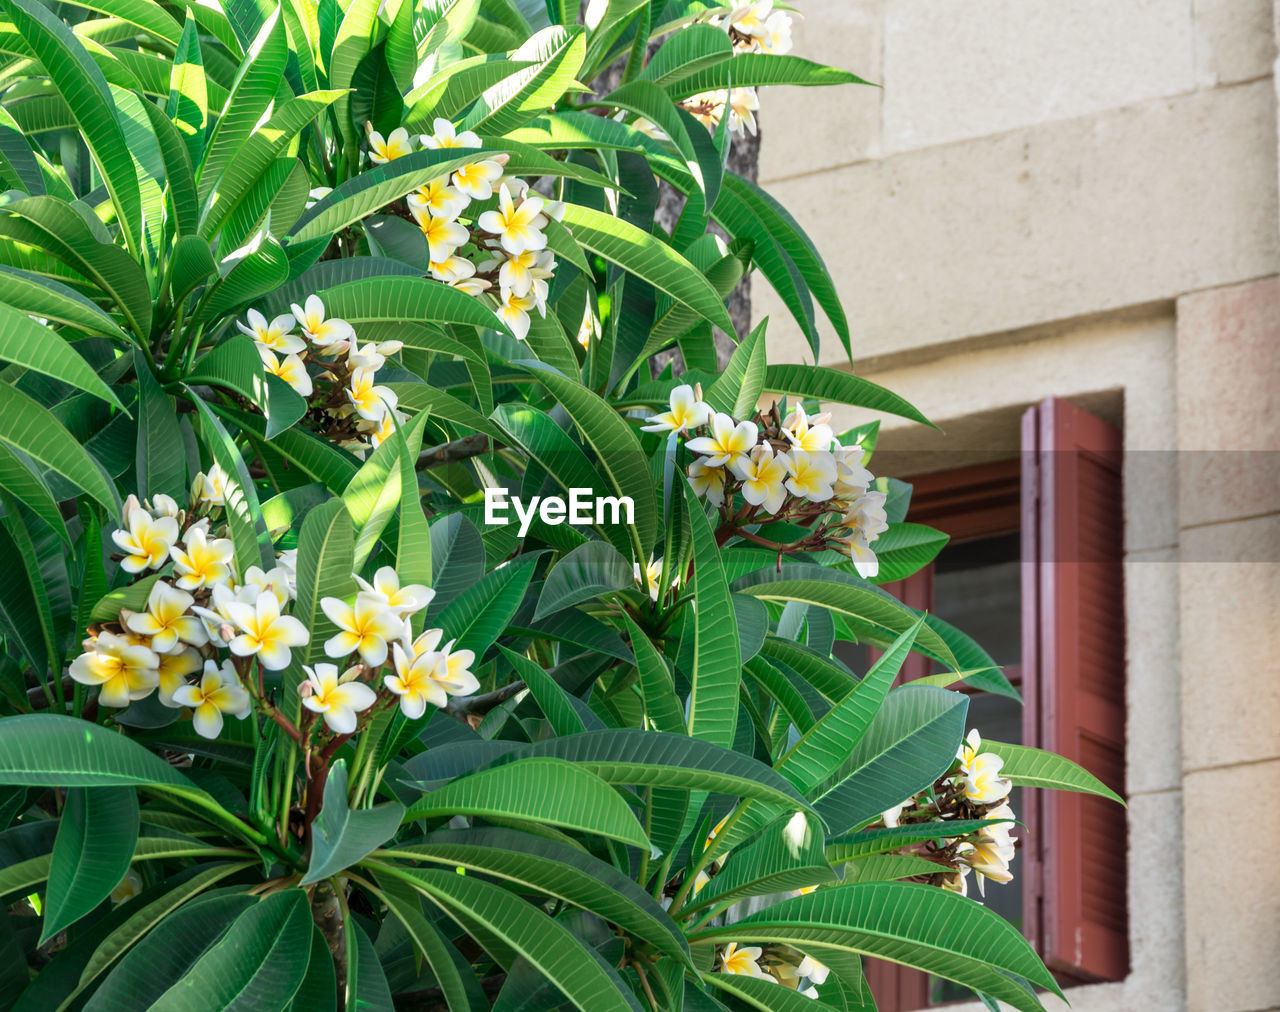 CLOSE-UP OF FLOWERING PLANT AGAINST YELLOW WALL